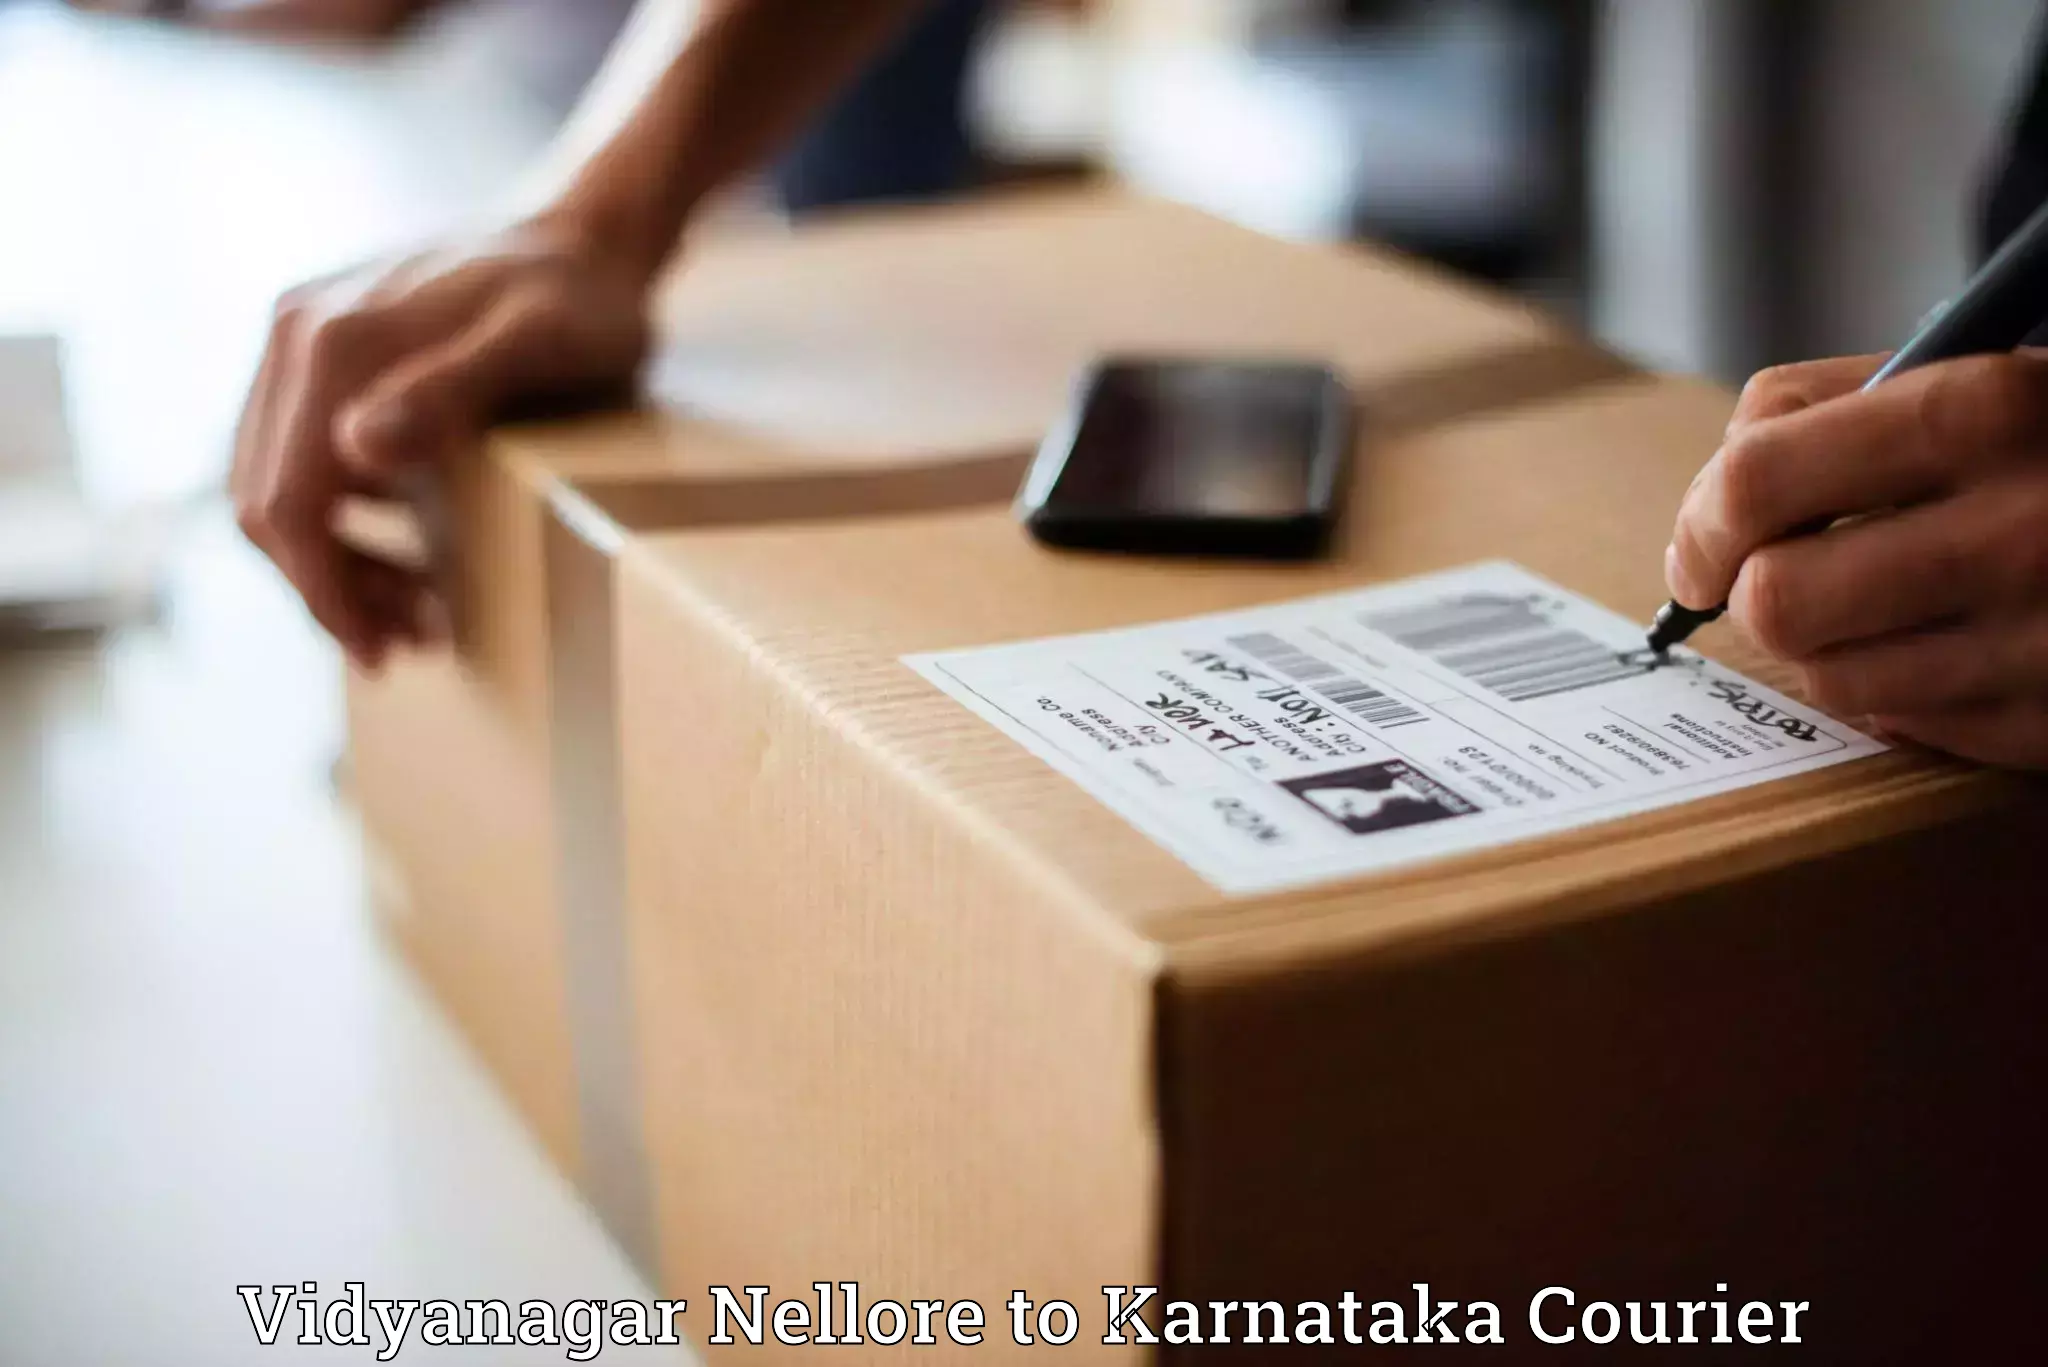 Multi-national courier services Vidyanagar Nellore to Kollegal